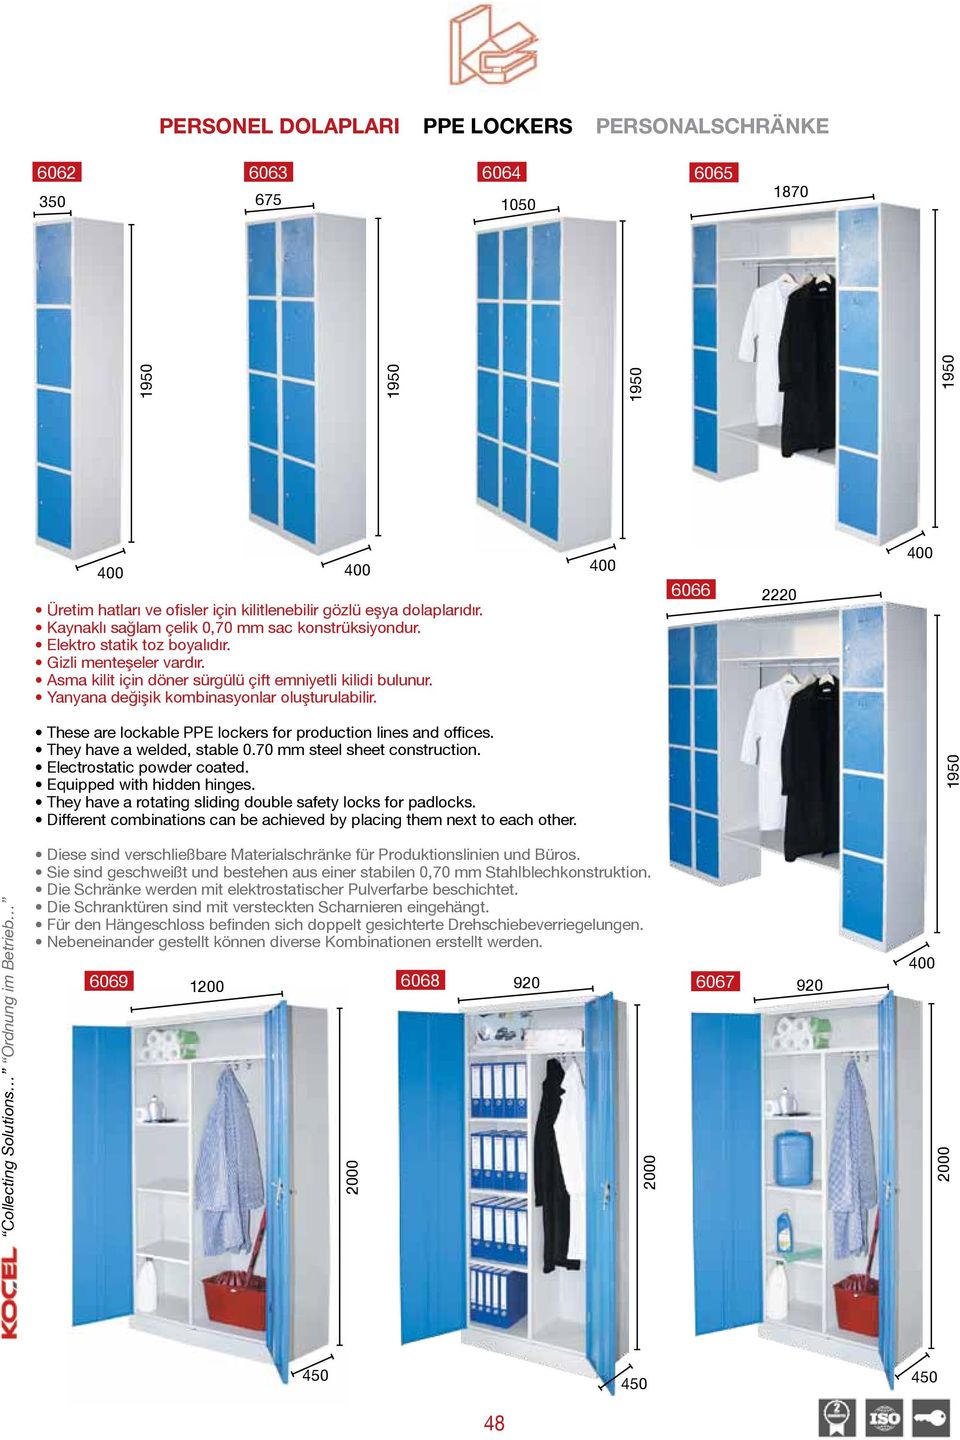 Yanyana değişik kombinasyonlar oluşturulabilir. 6066 2220 Collecting Solutions Ordnung im Betrieb These are lockable PPE lockers for production lines and offices. They have a welded, stable 0.